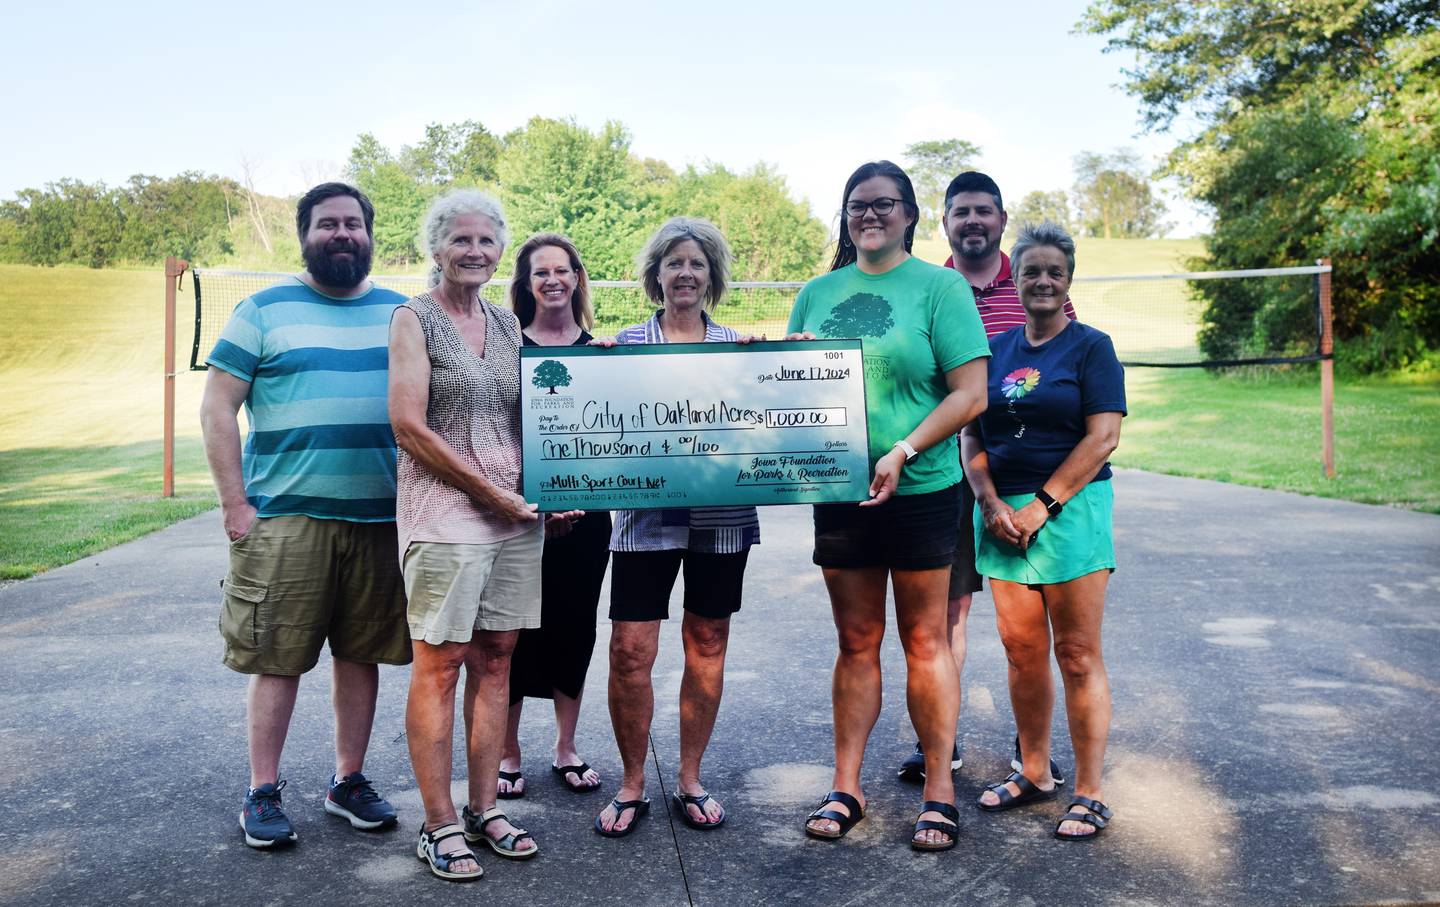 From left: Clinton Follette, Susan Martin, Cassy Thompson, Lisa Griffith, Danae Edwards, Jared Johnston and Tammy Strawser pose for a picture with a $1,000 check from the Iowa Foundation for Parks and Recreation to go towards an adjustable net system for the city park in Oakland Acres.